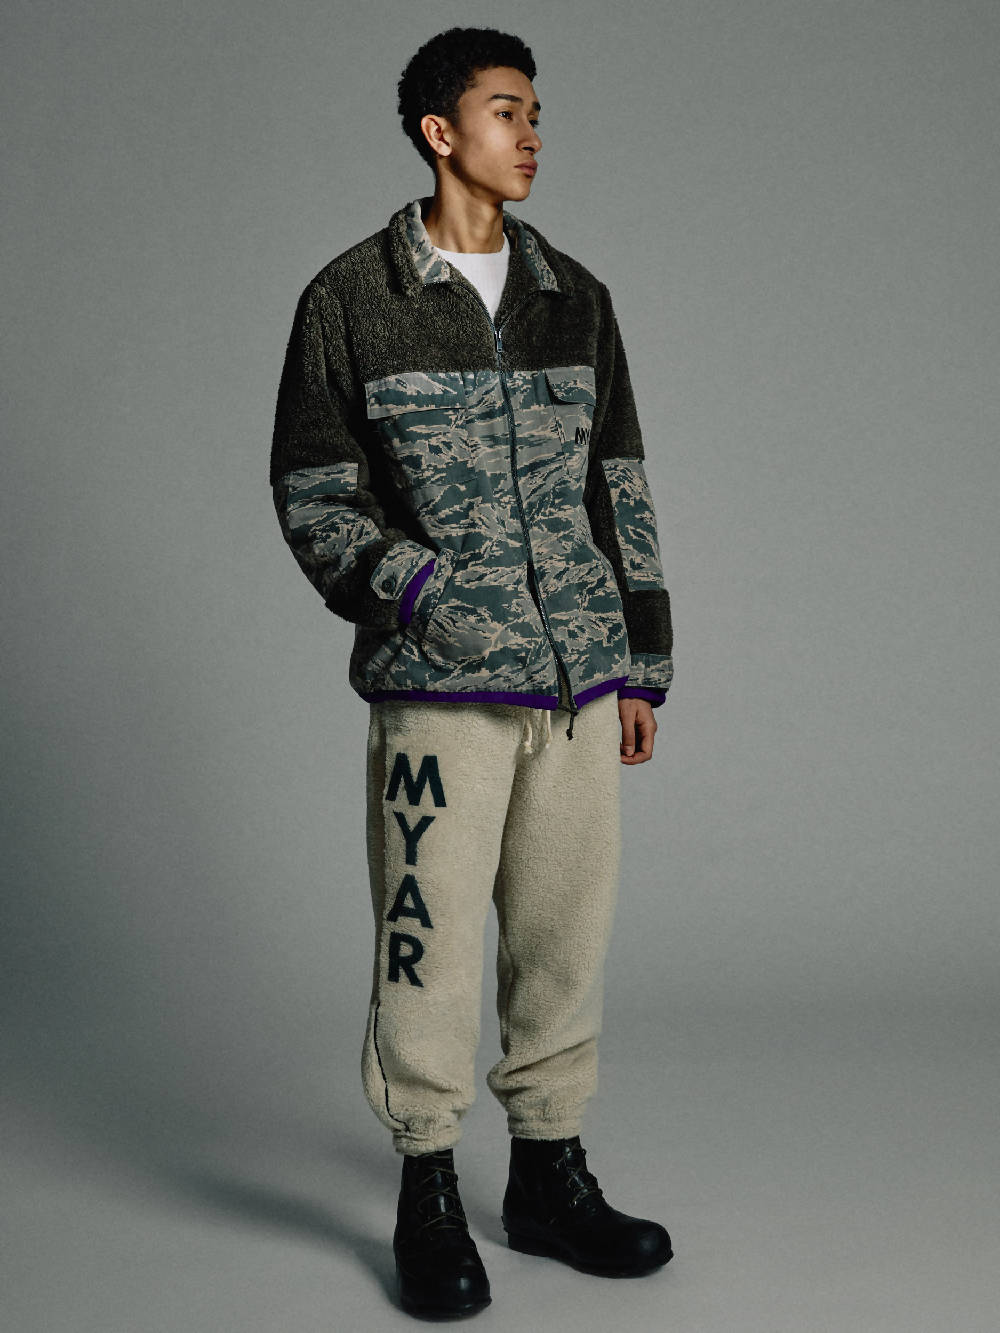 Myar Mypa15_B Off White Trousers